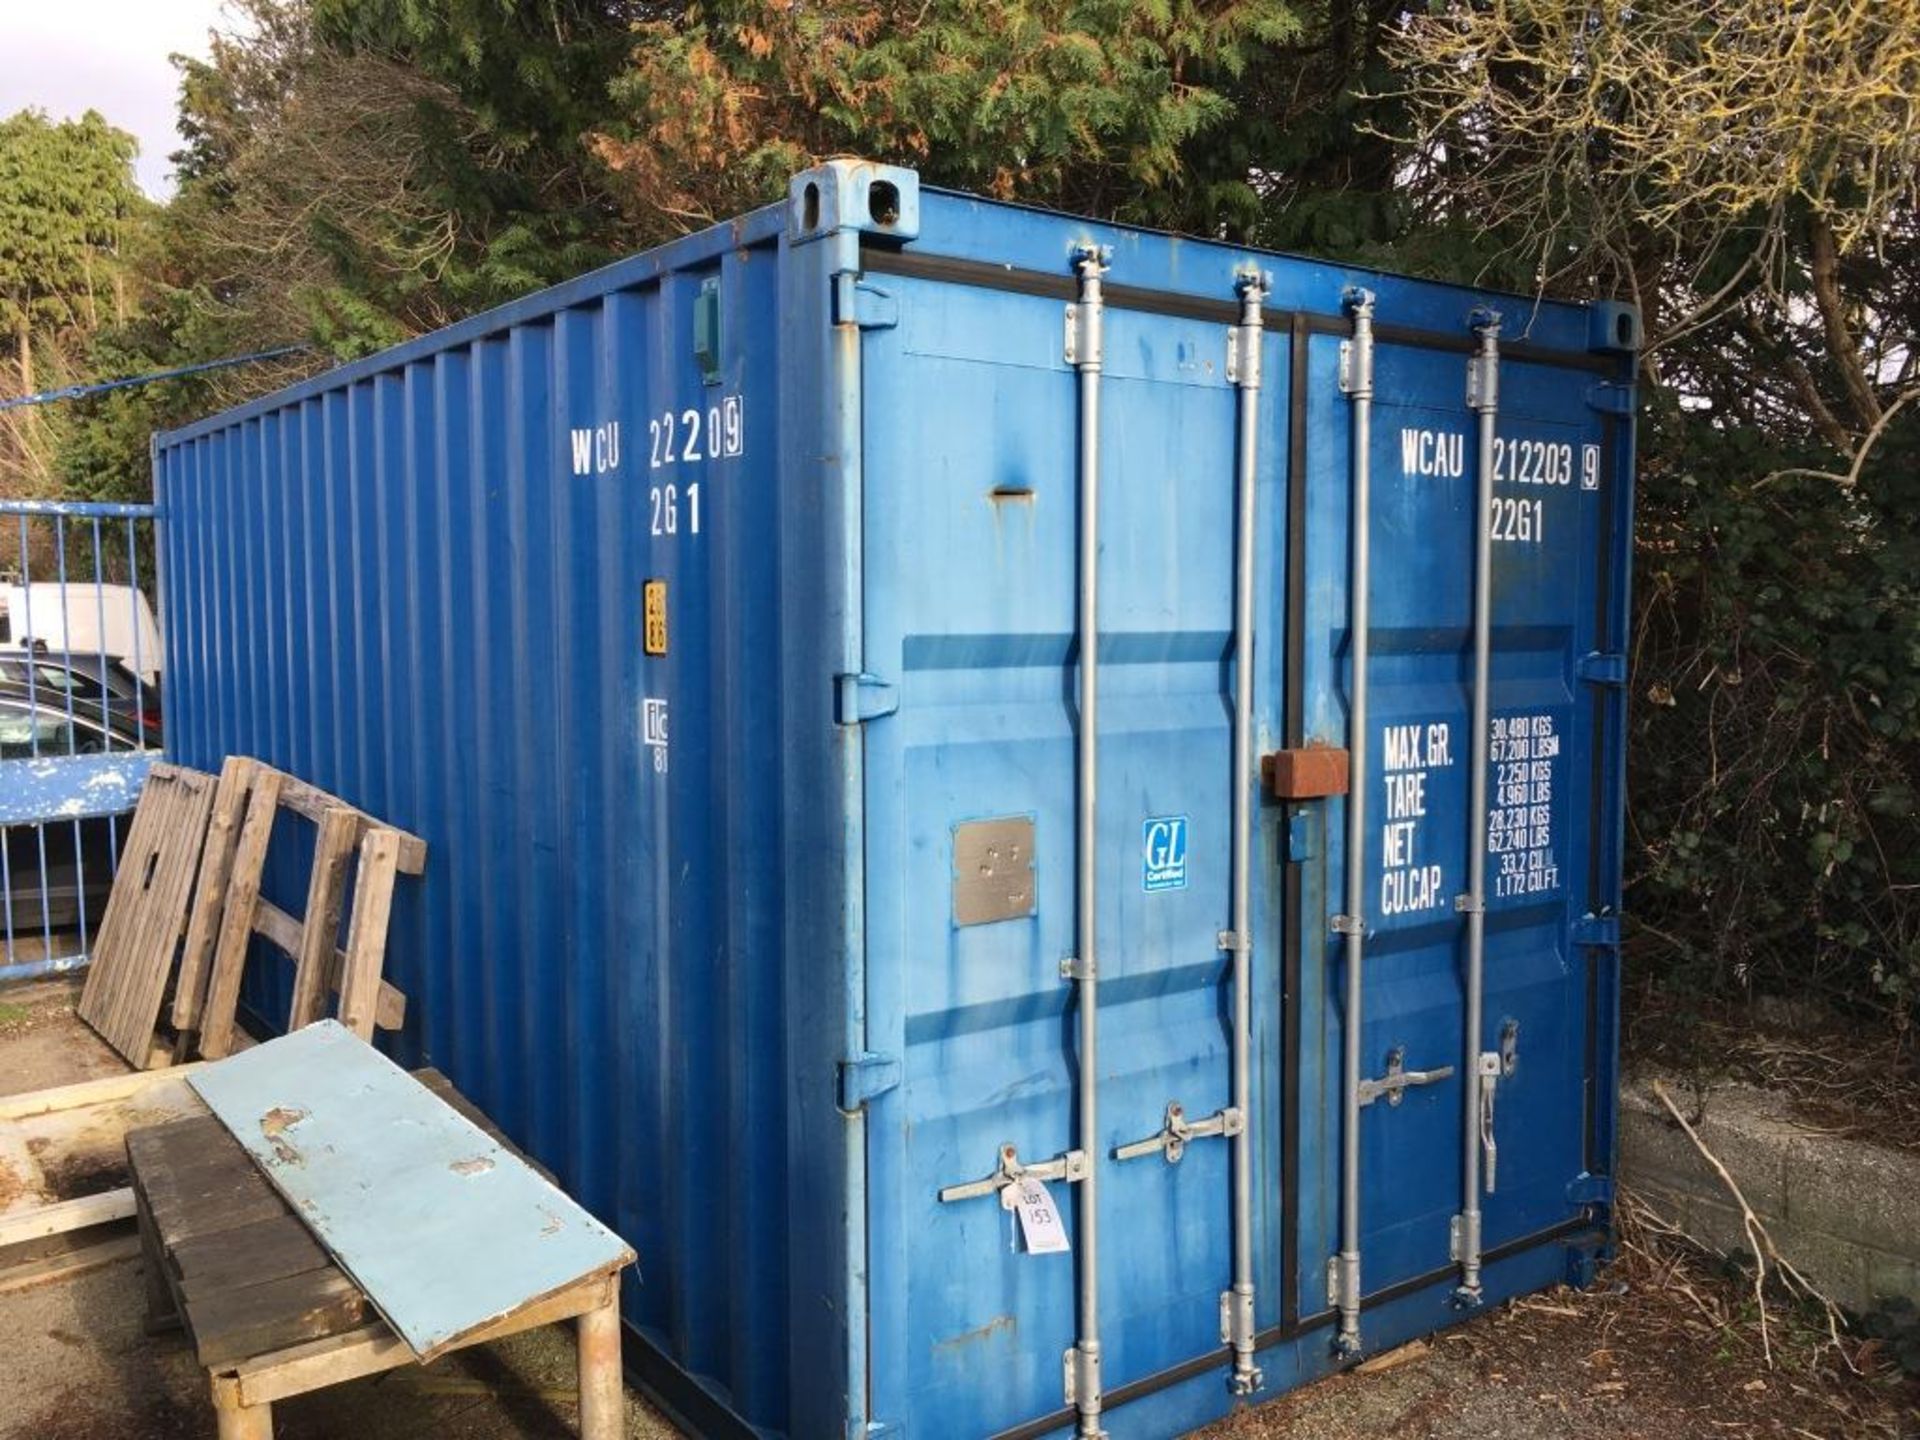 20' cargo container, Year of manufacture 2000. A work Method Statement and Risk Assessment must be